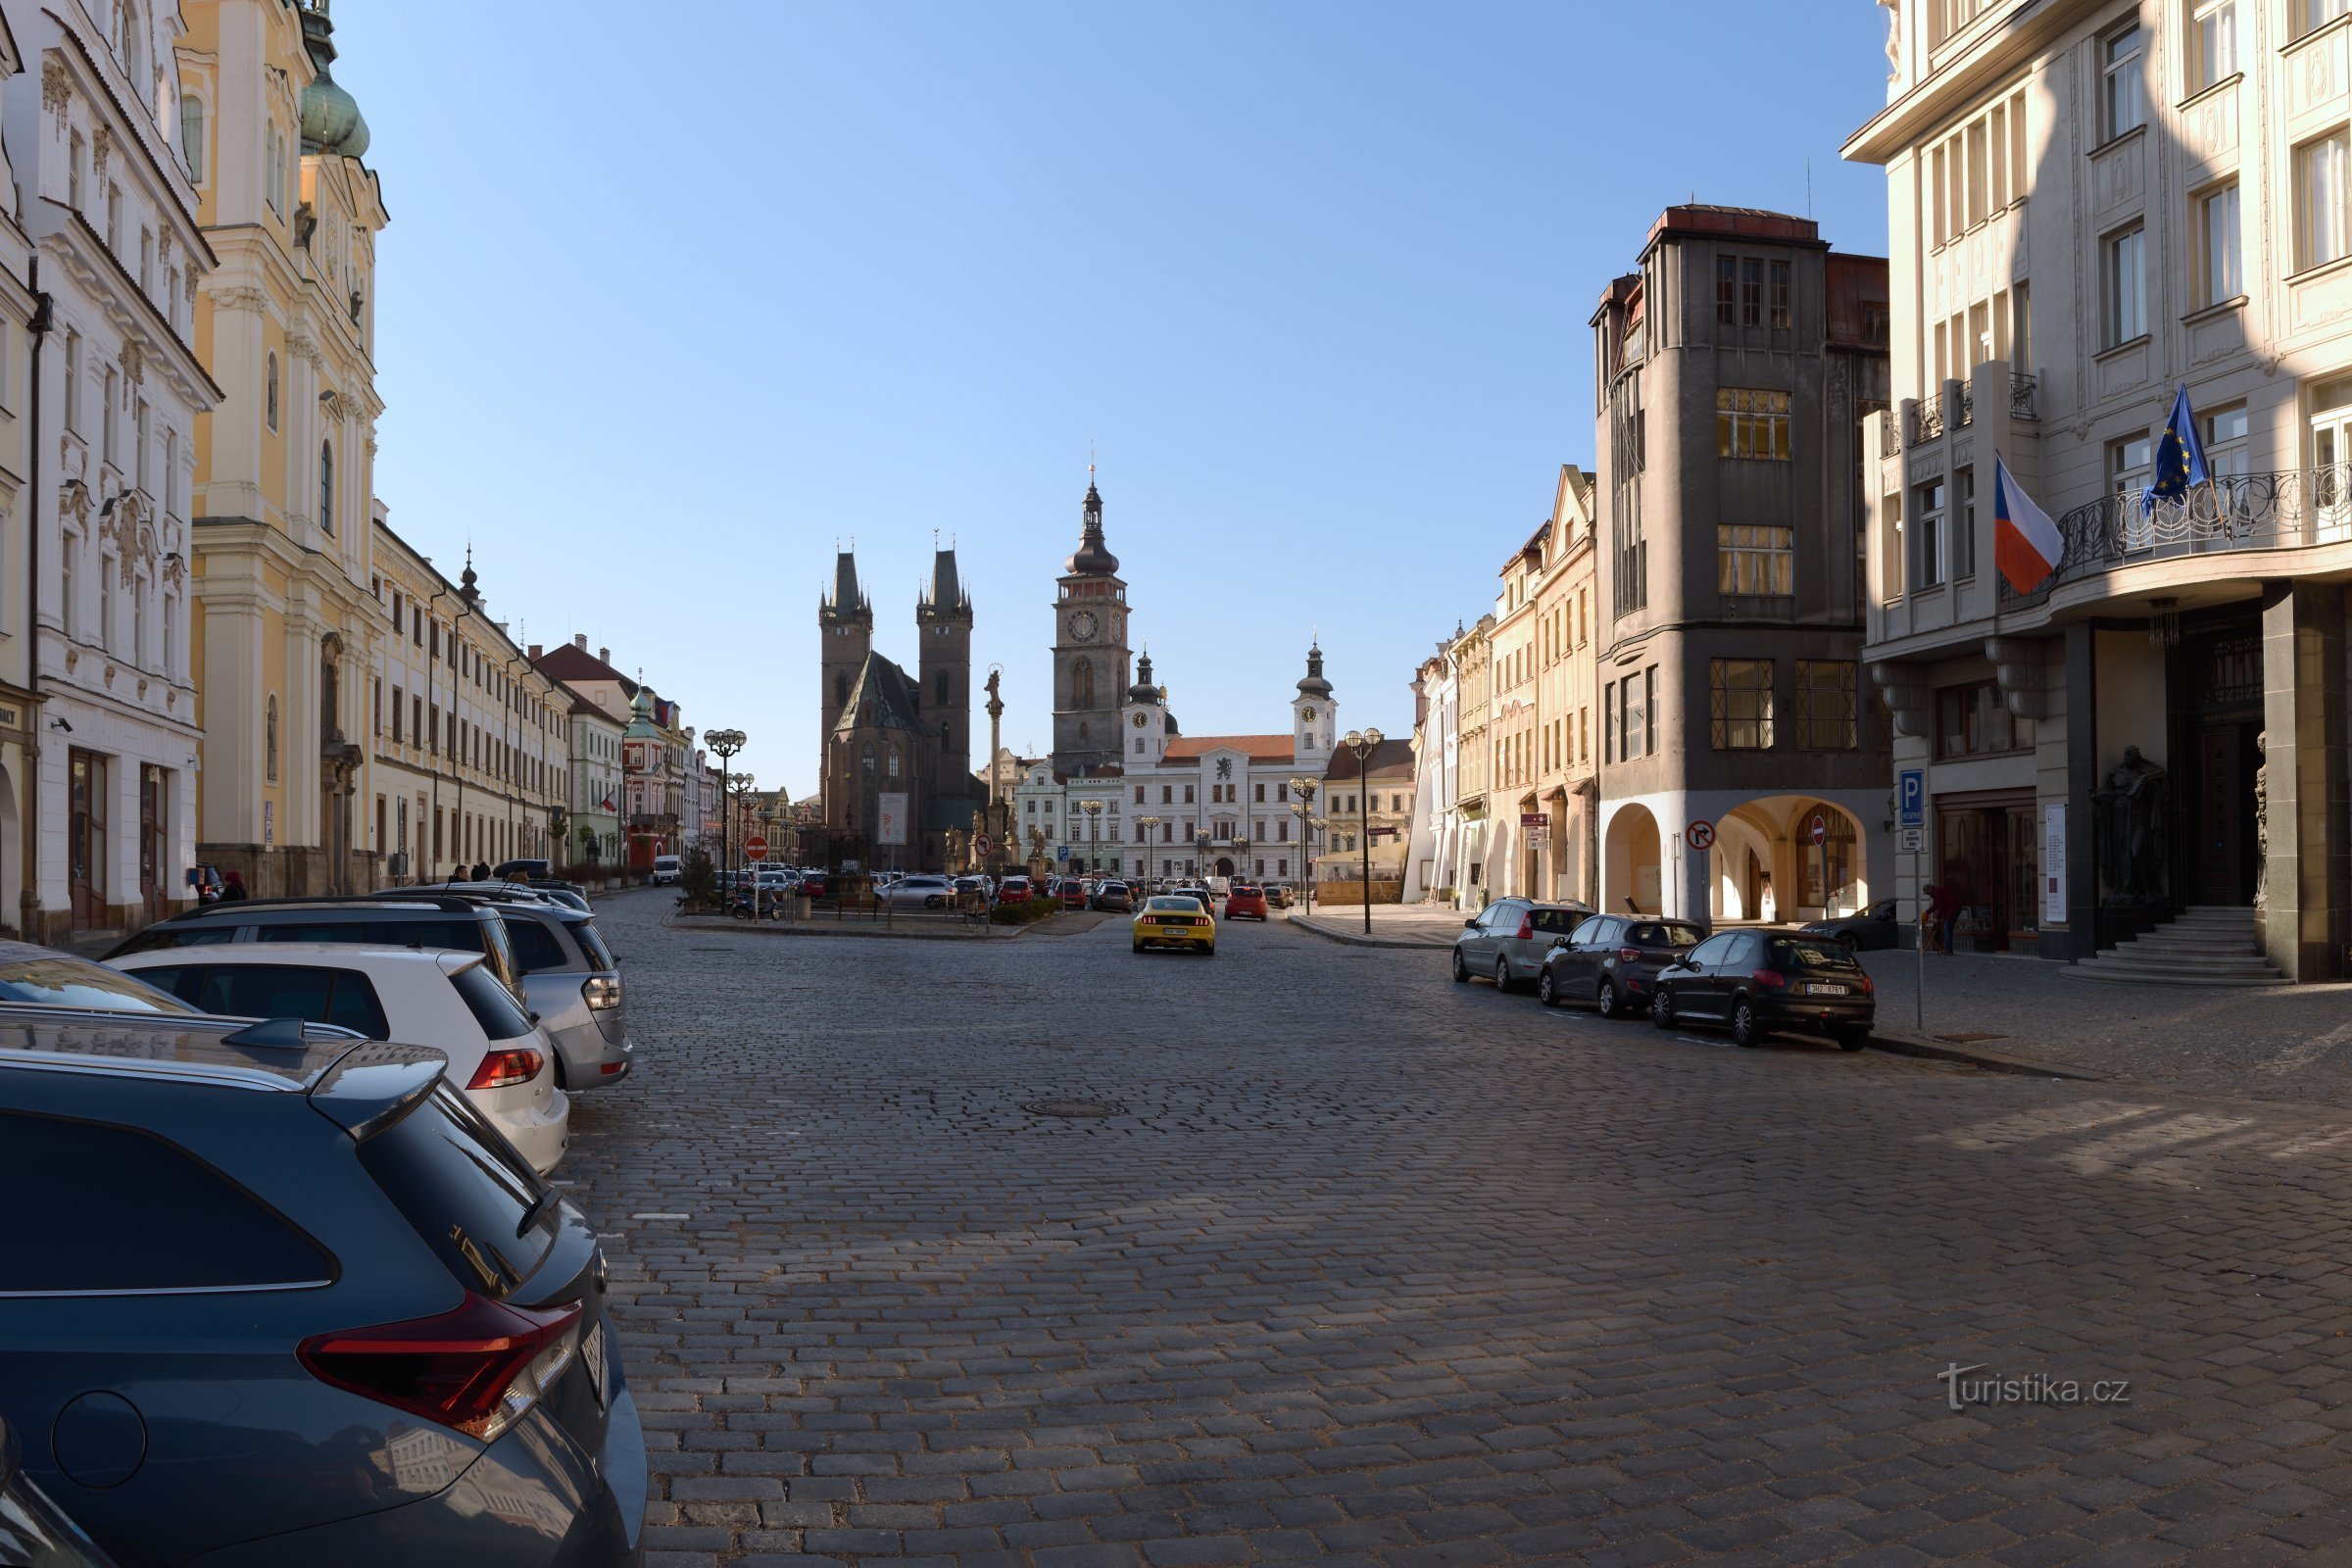 Large square in Hradec Králové with paid parking.